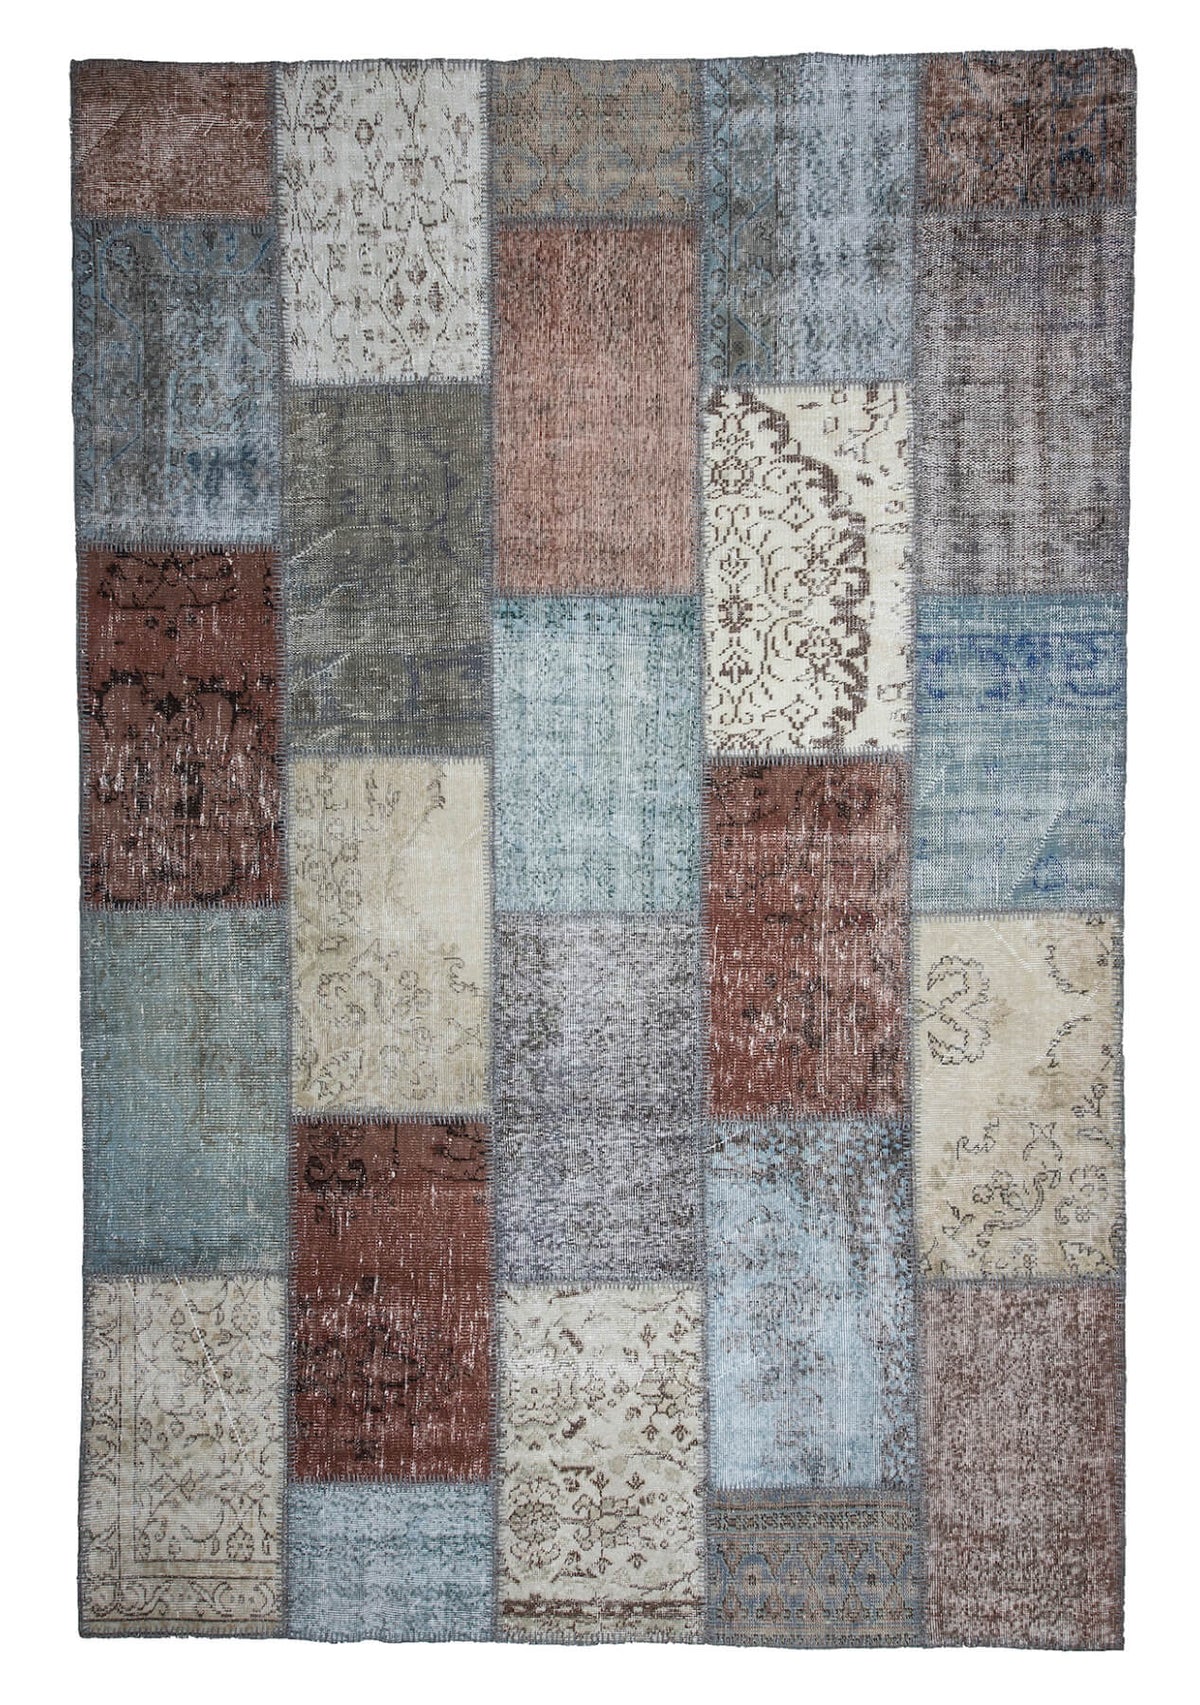 Explore and Buy Stylish Rugs for Entryways at Kuden Rugs